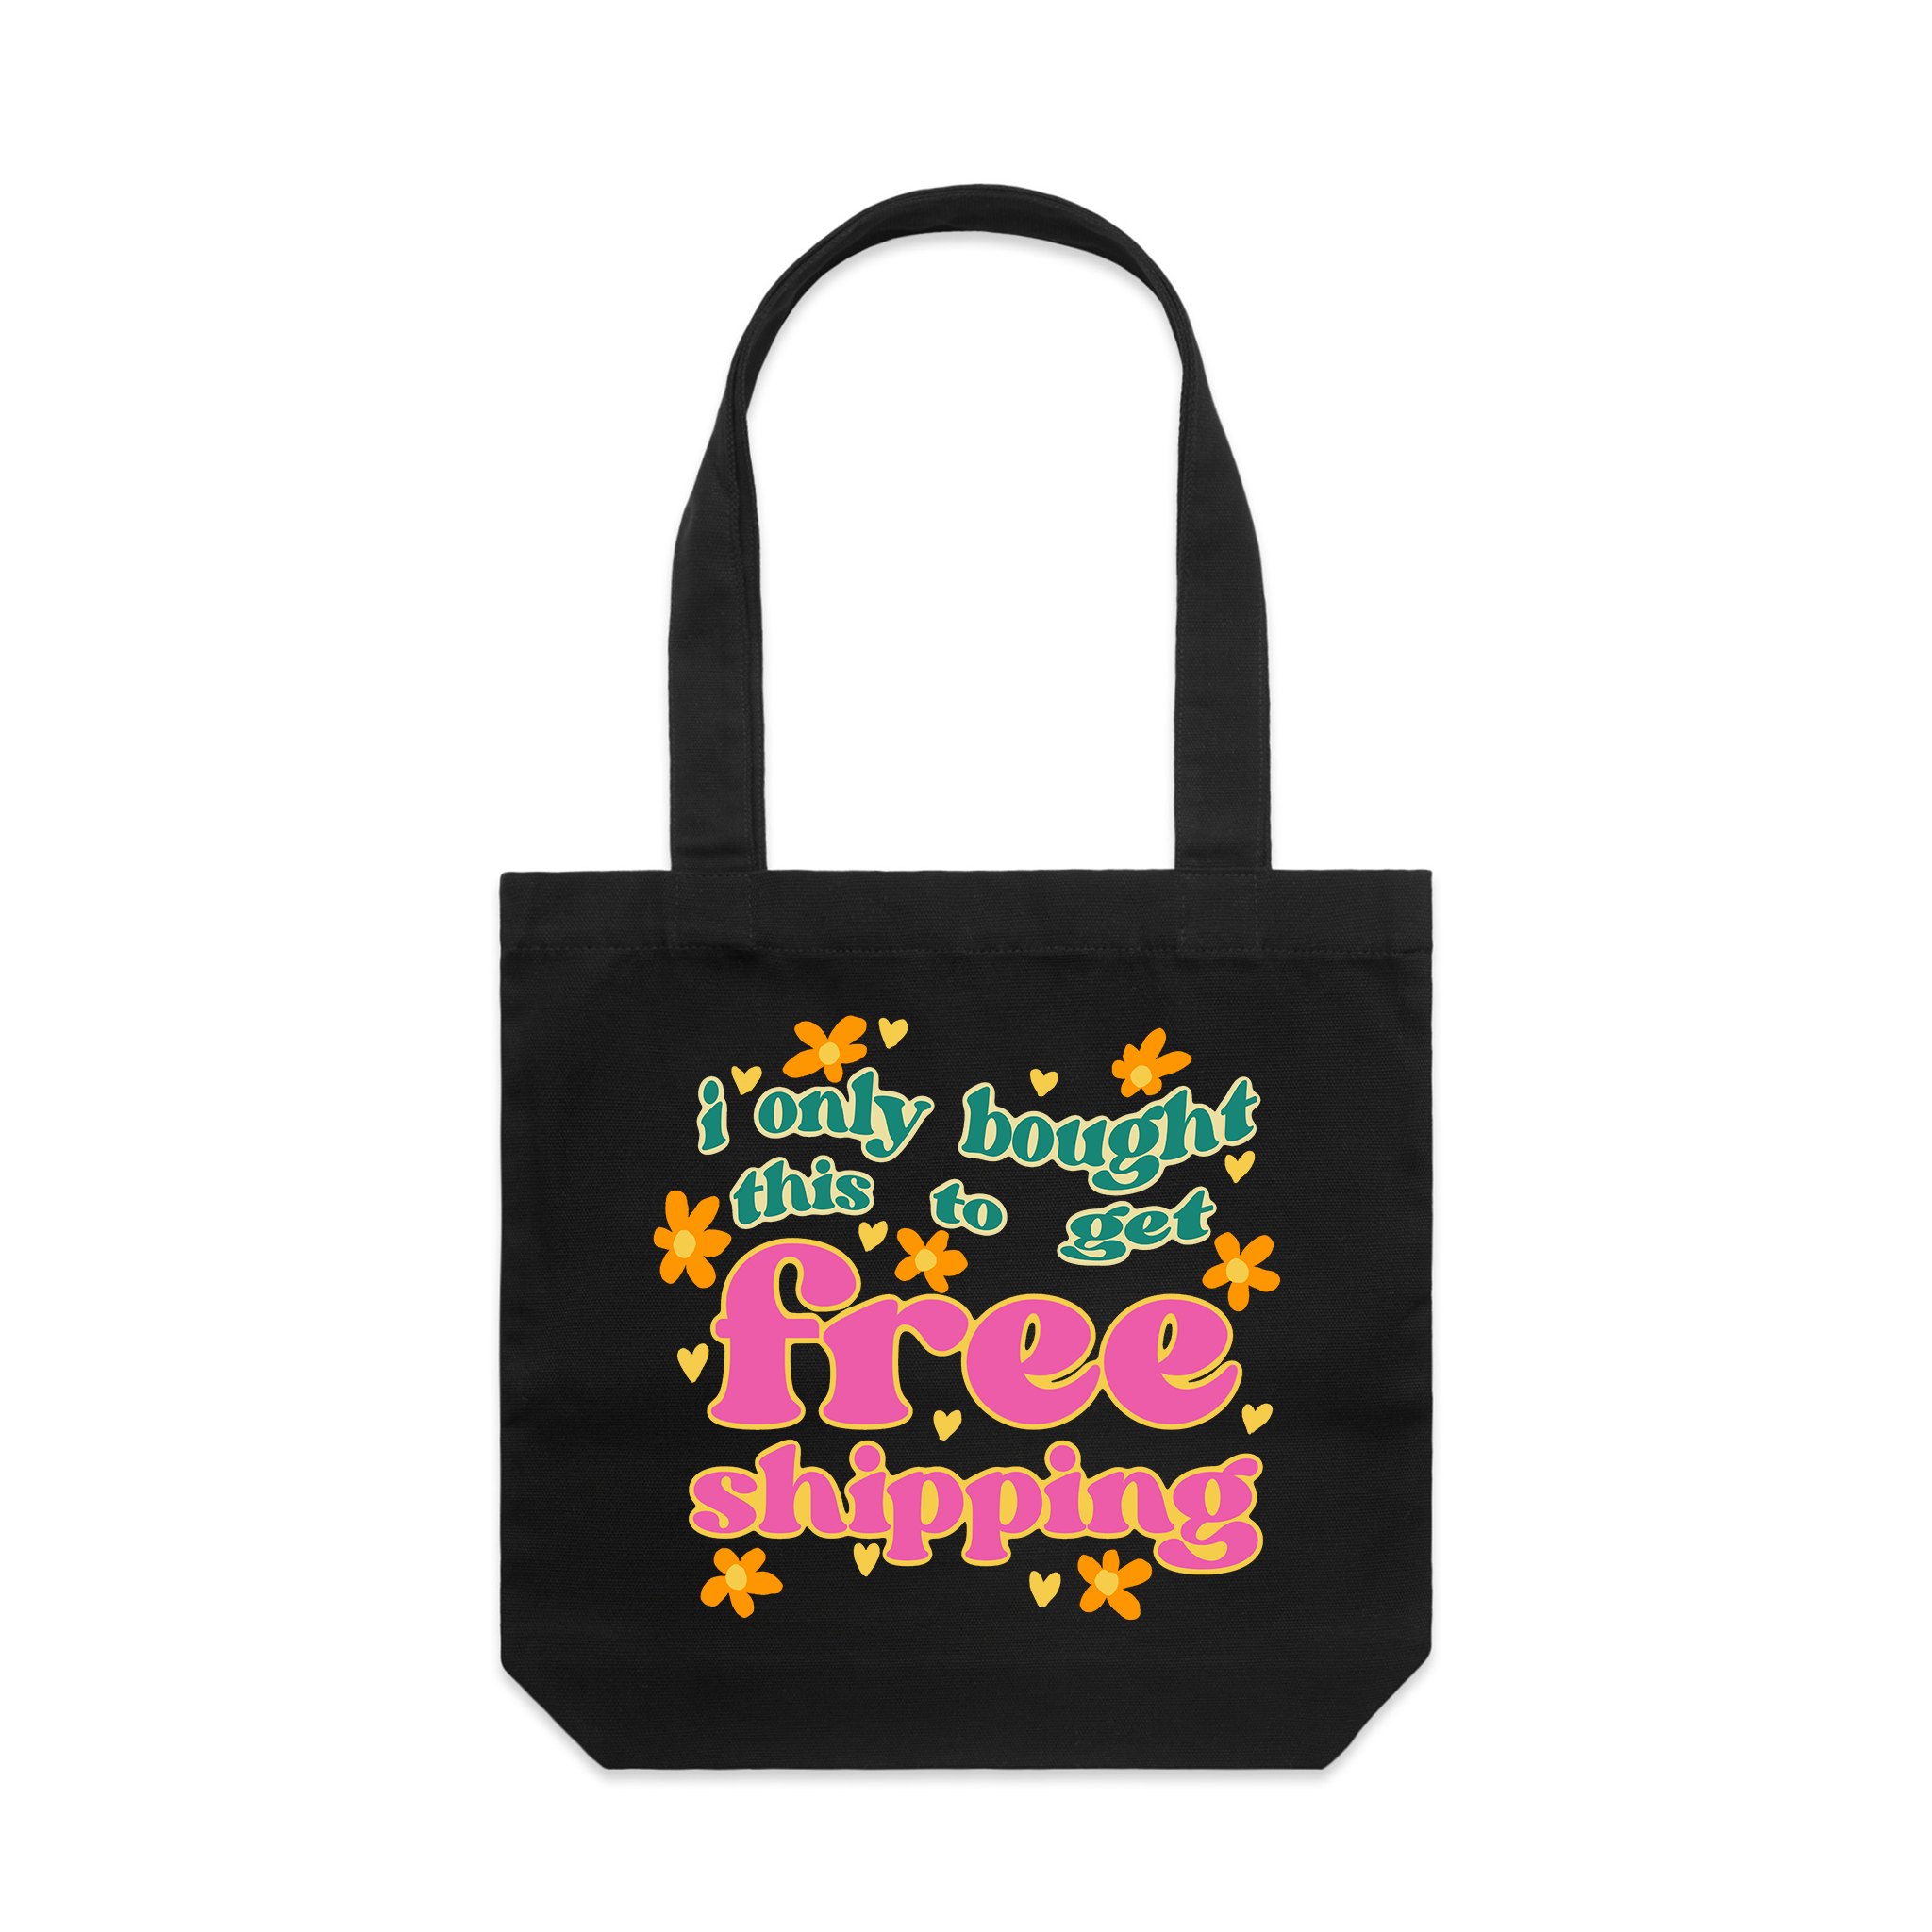 Free Shipping Tote